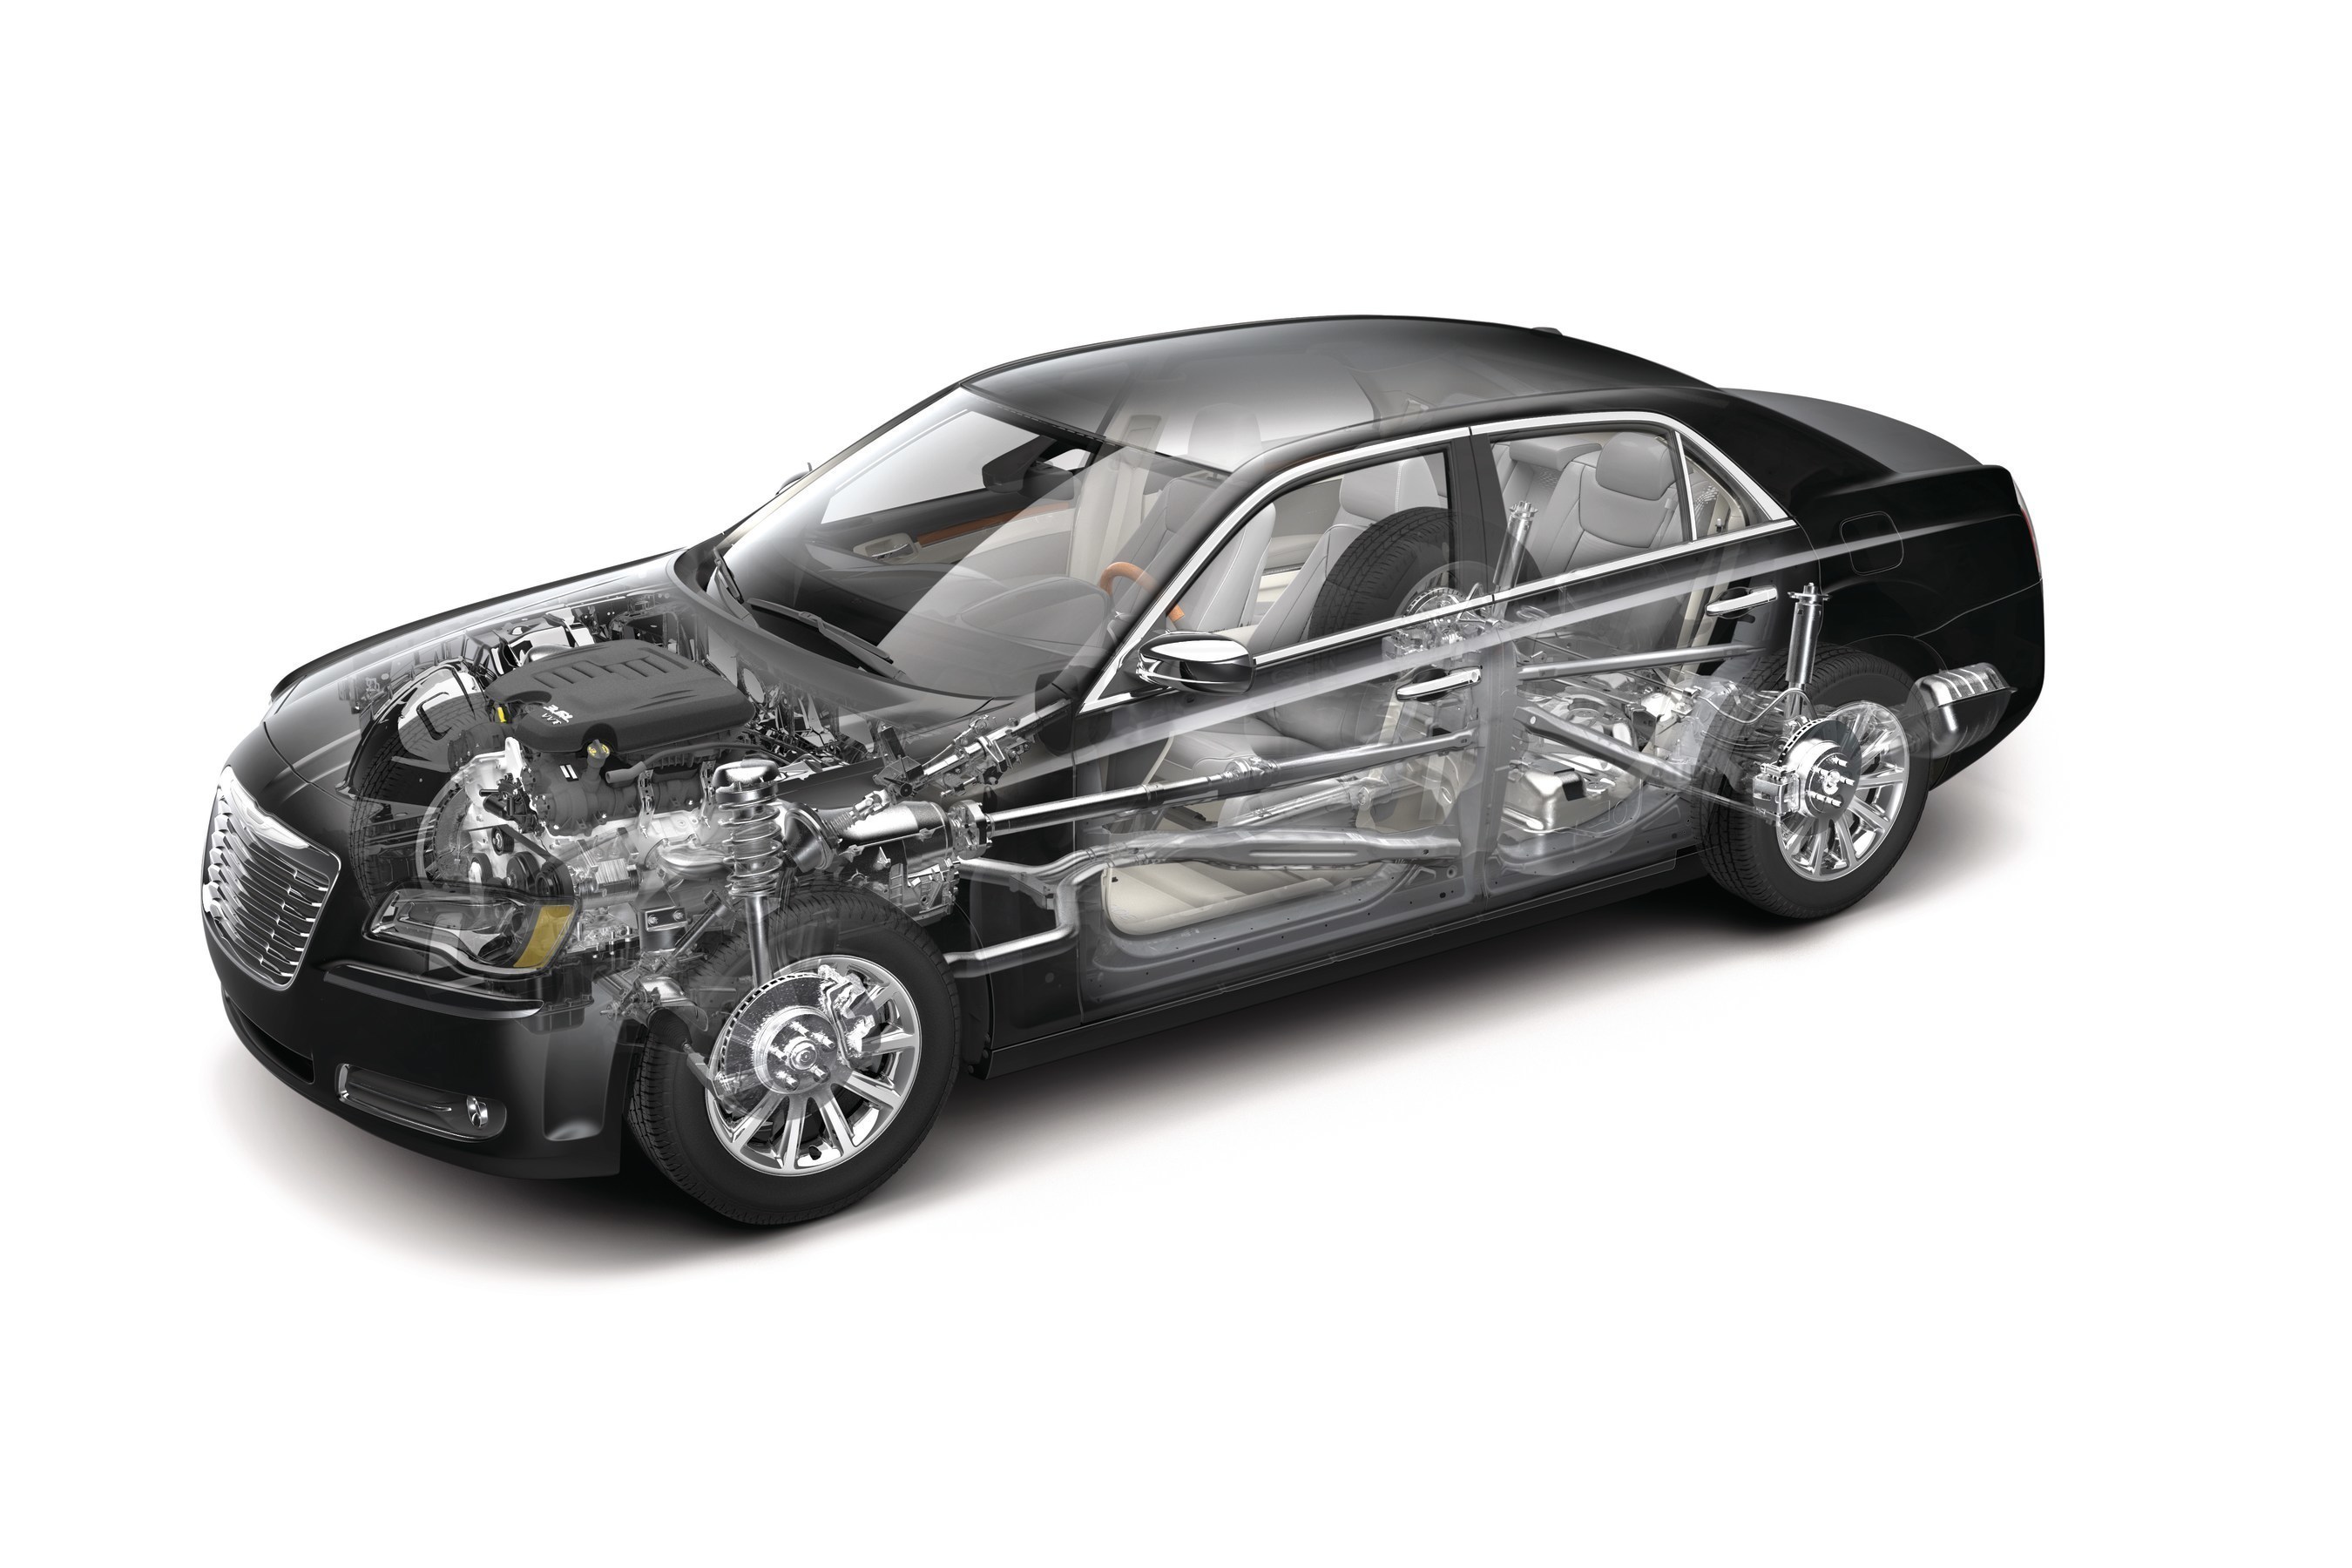 Mopar Complete 360 plans provide vehicle owners hassle-free protection for 5 years/60,000 miles or 6 years/75,000 miles. The plans include complete mechanical coverage for the entire vehicle, covering 5,000-plus components.